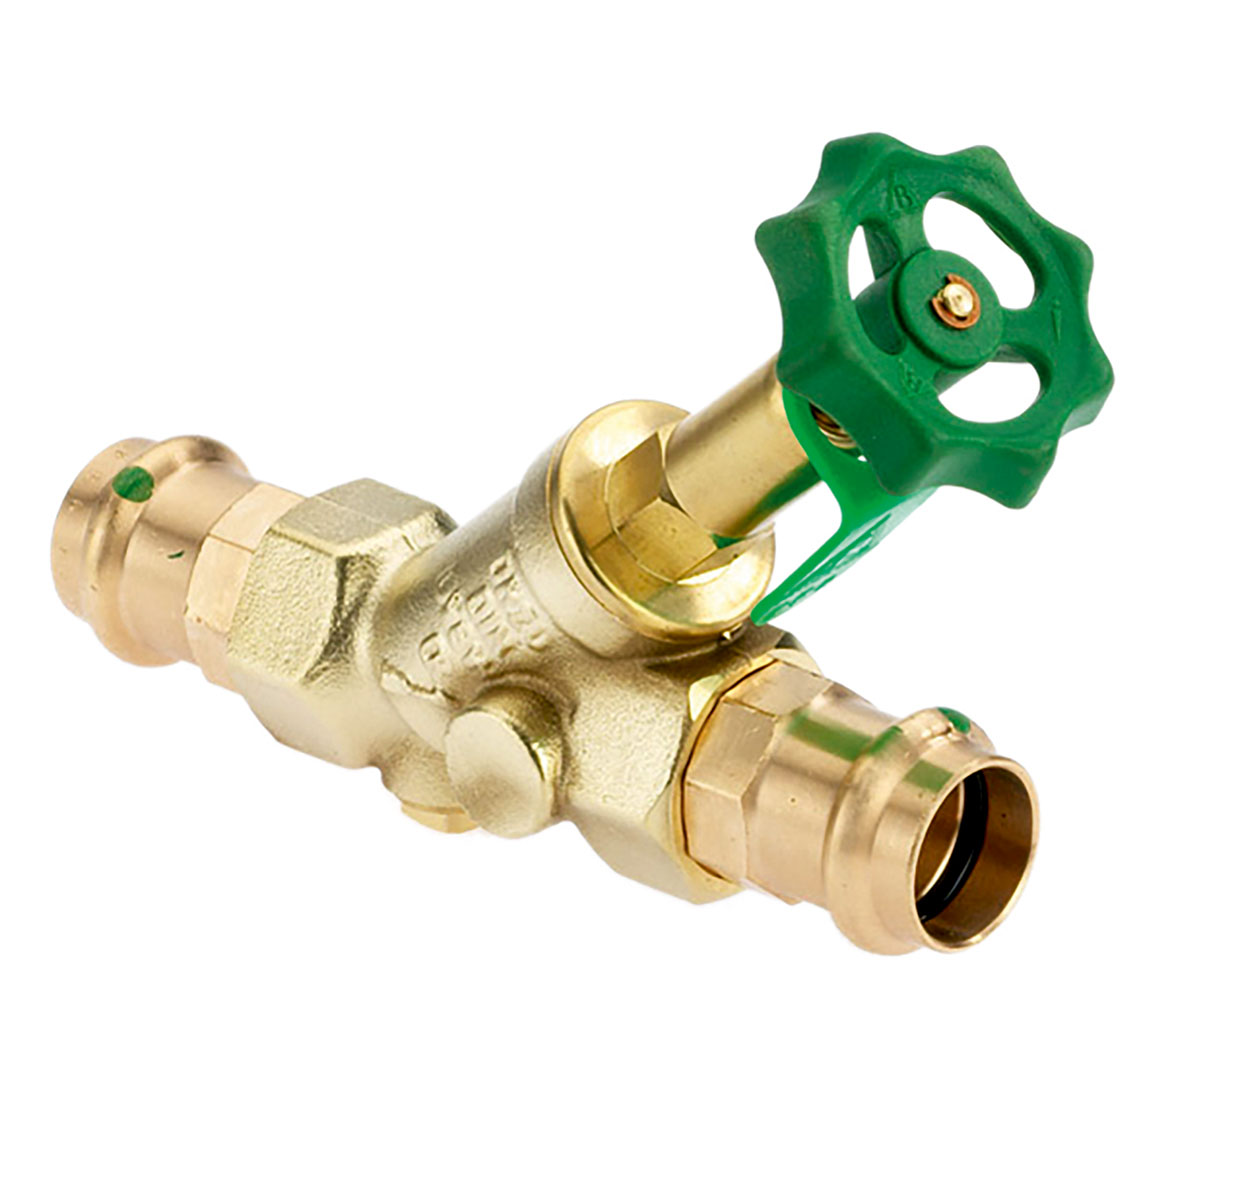 1680180 - CR-Brass Combined Free-flow and Backflow-preventer Valve Viega Profipress, rising, without drain valve